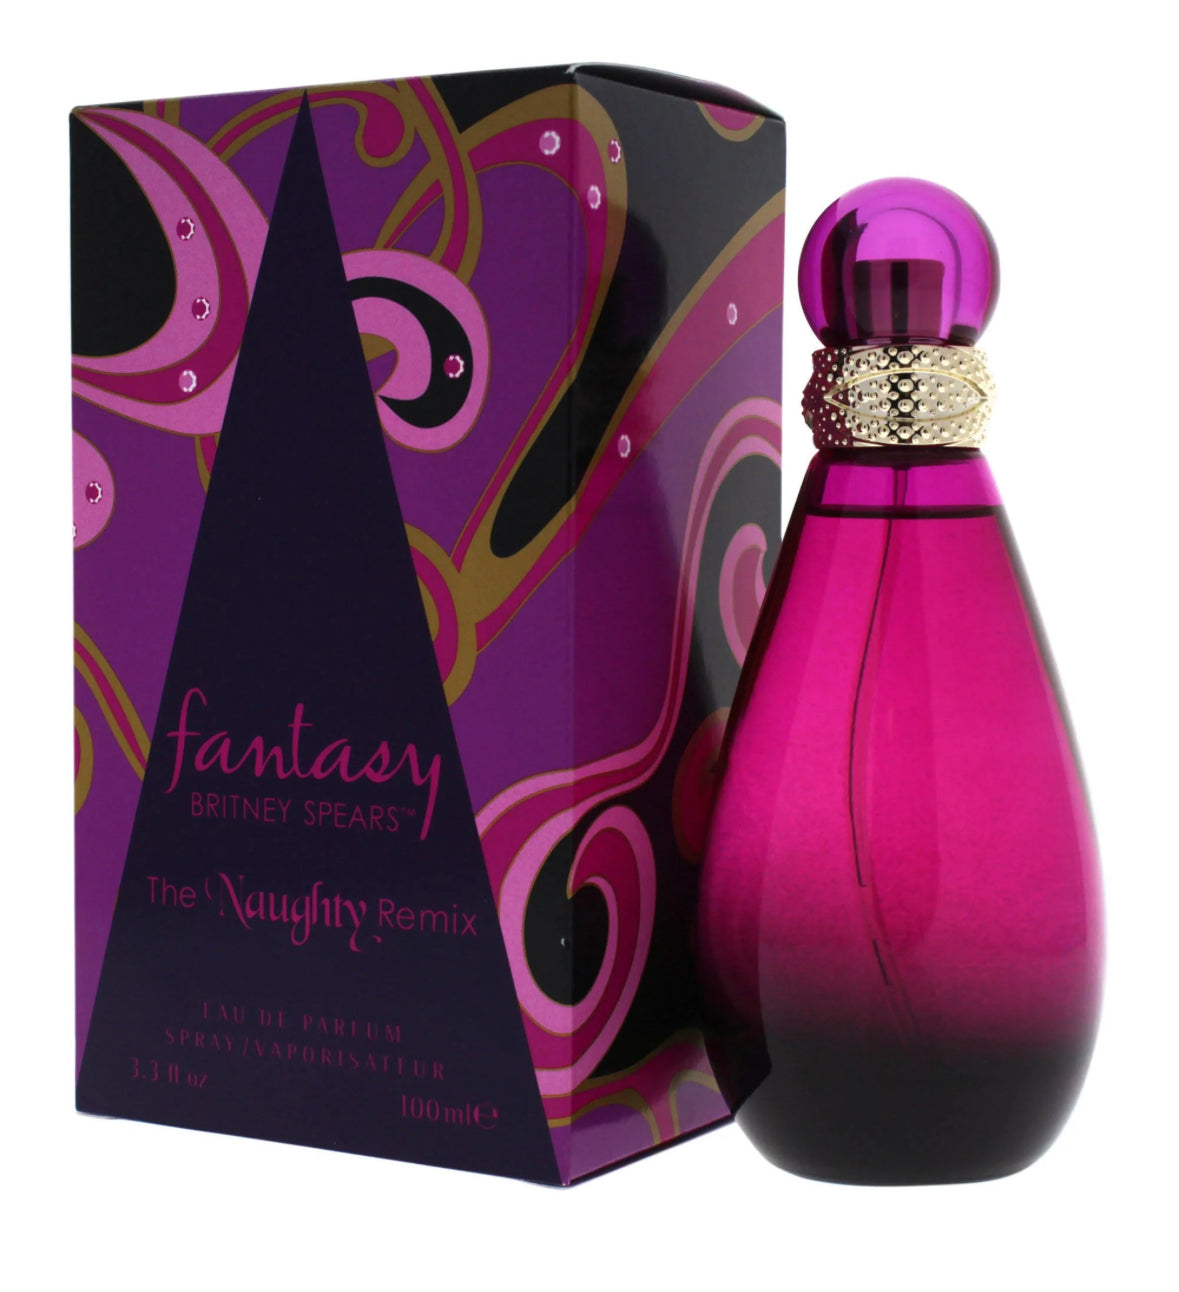 Britney Spears - The Naughty Remix- 3.3 oz Full Size